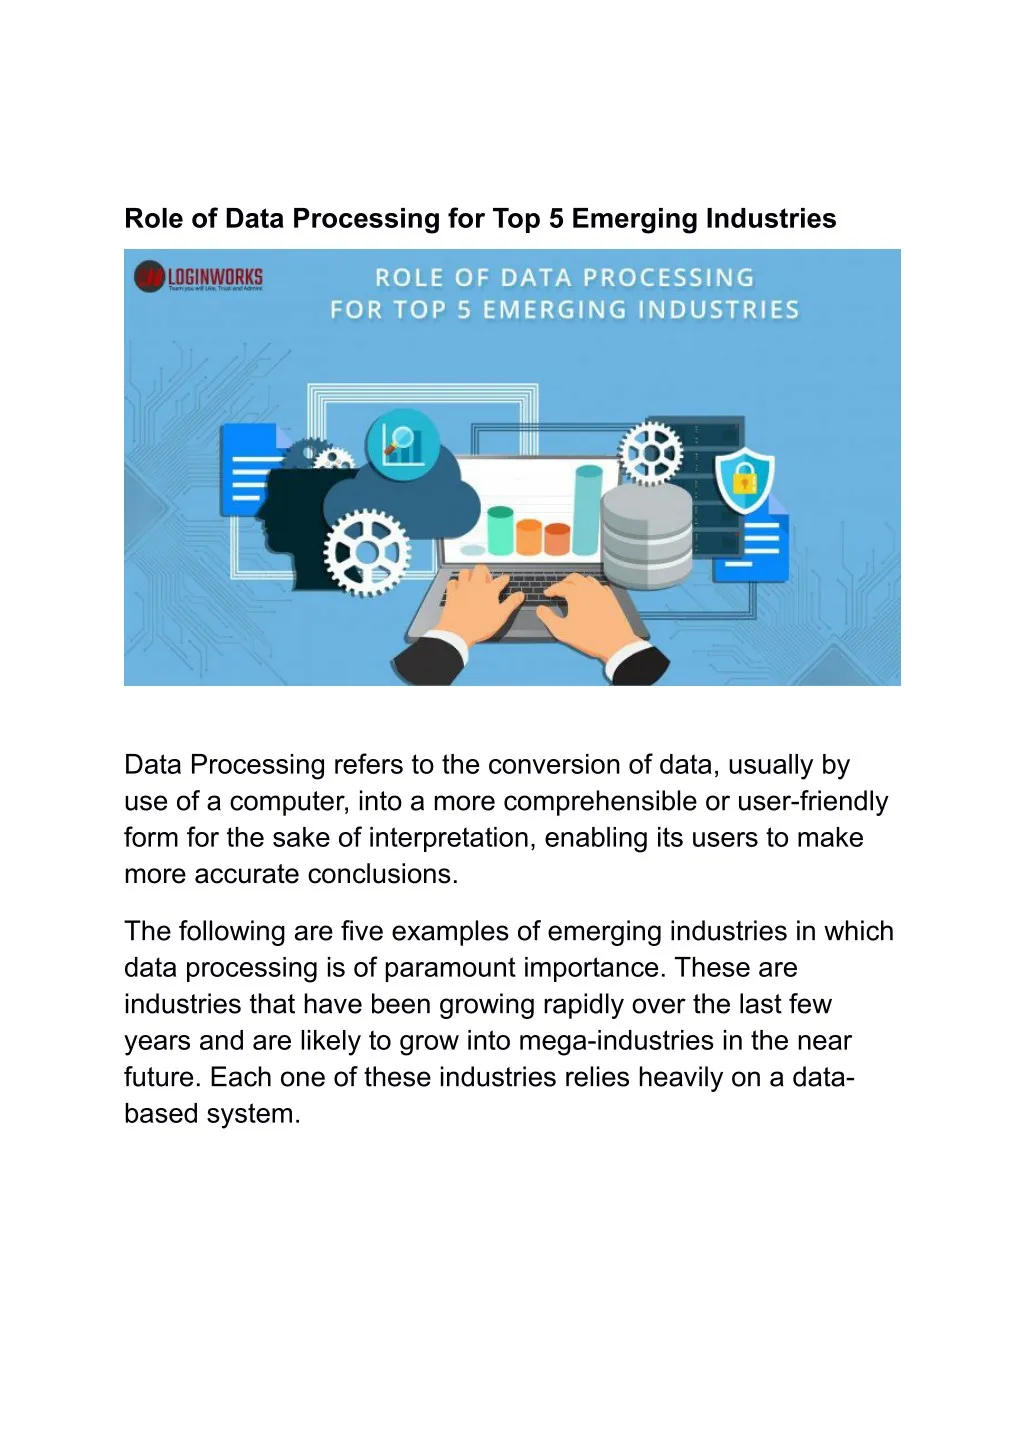 role of data processing for top 5 emerging